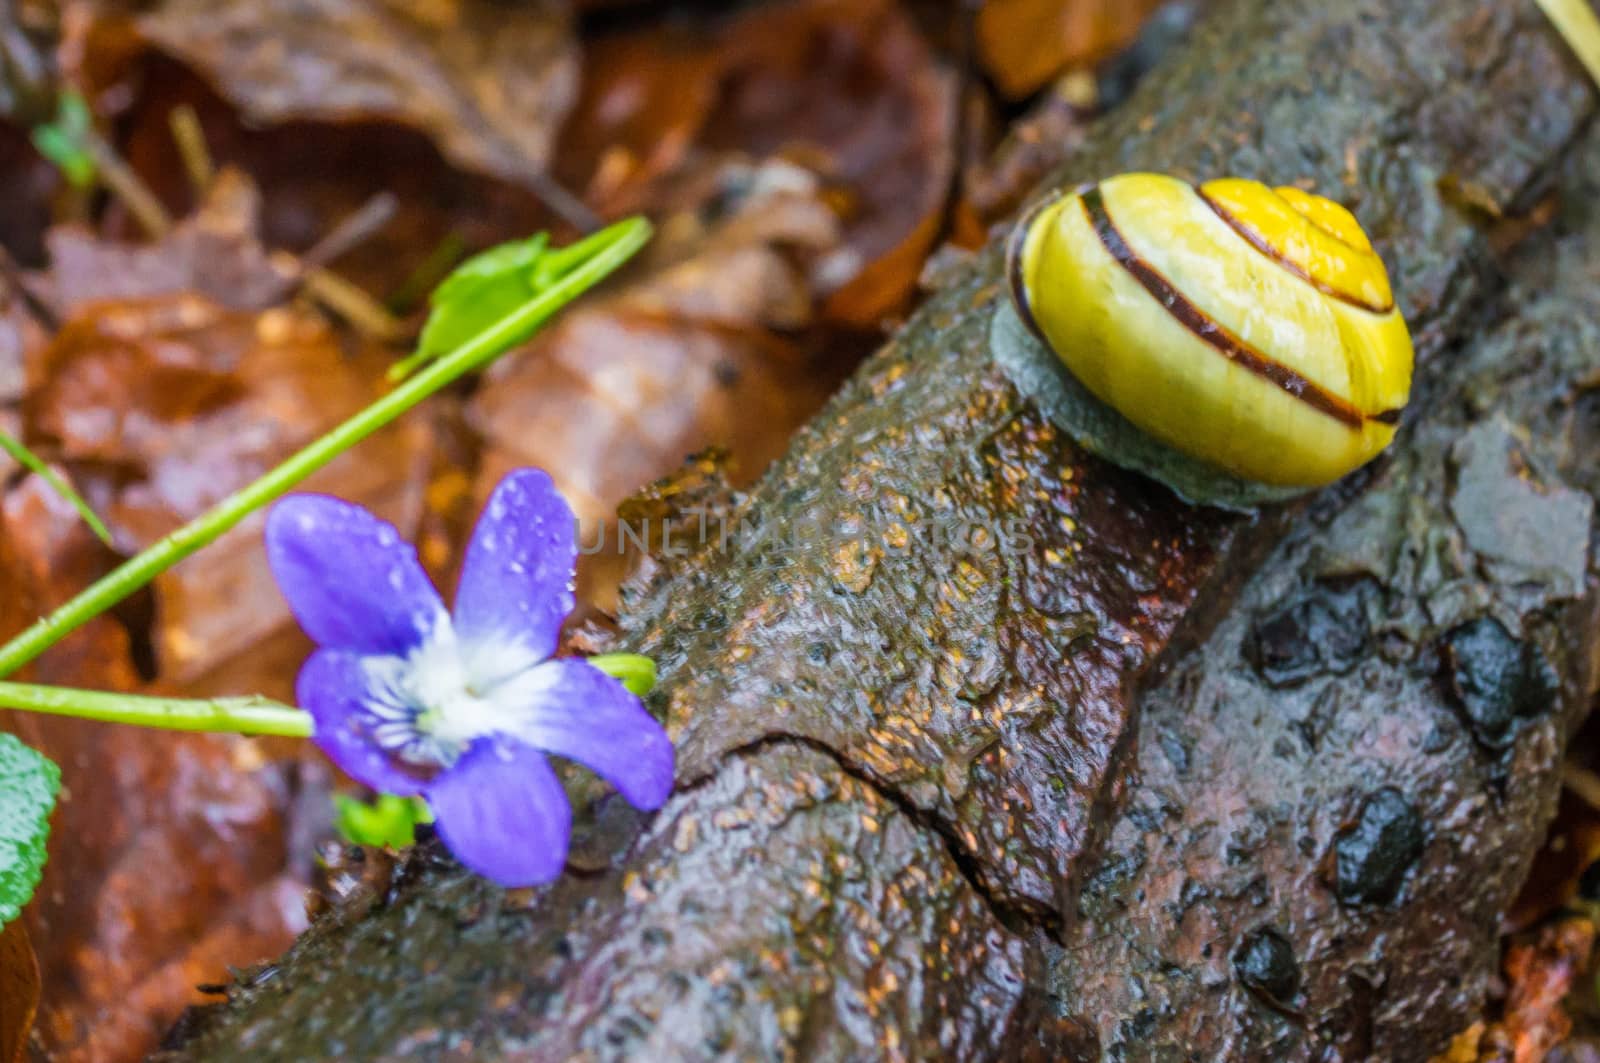 Yellow snail and purple flower by bignoub